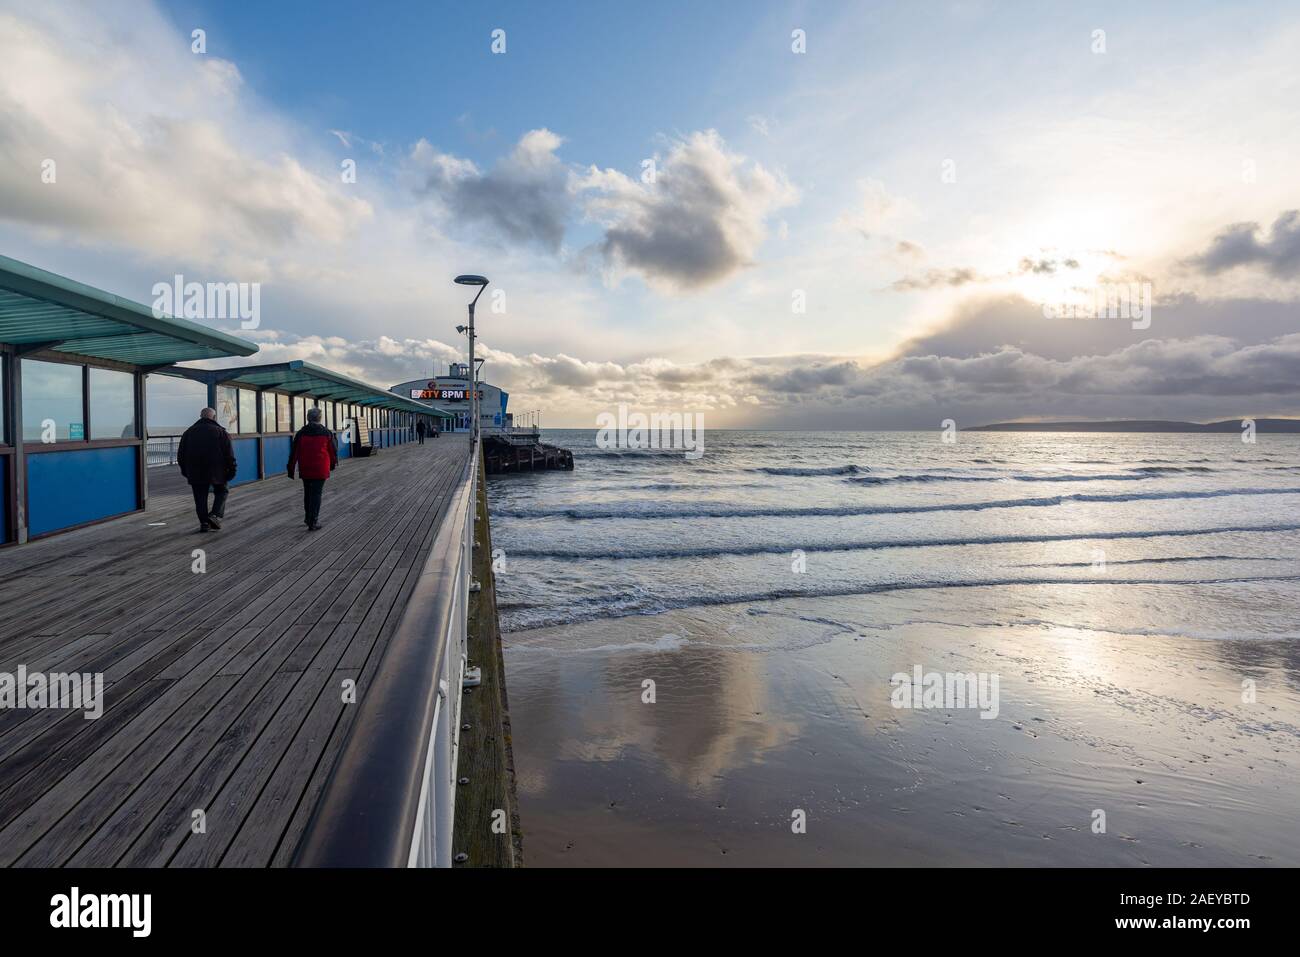 Bournemouth in winter, Dorset, UK, December 2019. Cold with rain showers, sunny with a strong wind on the south coast in the afternoon. Sunshine and stormy clouds over the Isle of Purbeck and hardy people on the pier in winter coats. Stock Photo